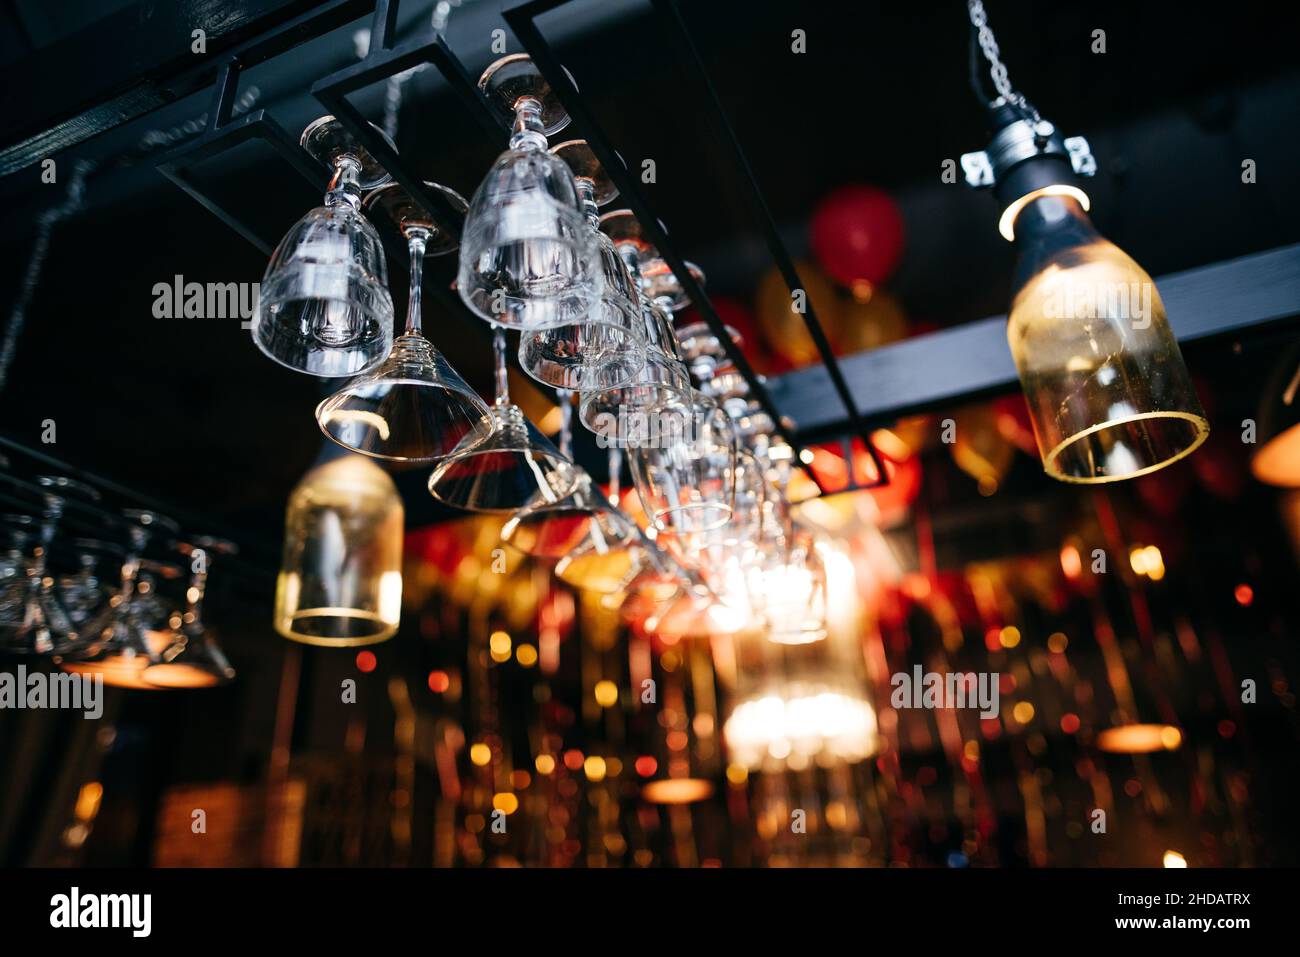 Rows of empty wine glasses on the bar counter in the restaurant or bar. Stock Photo